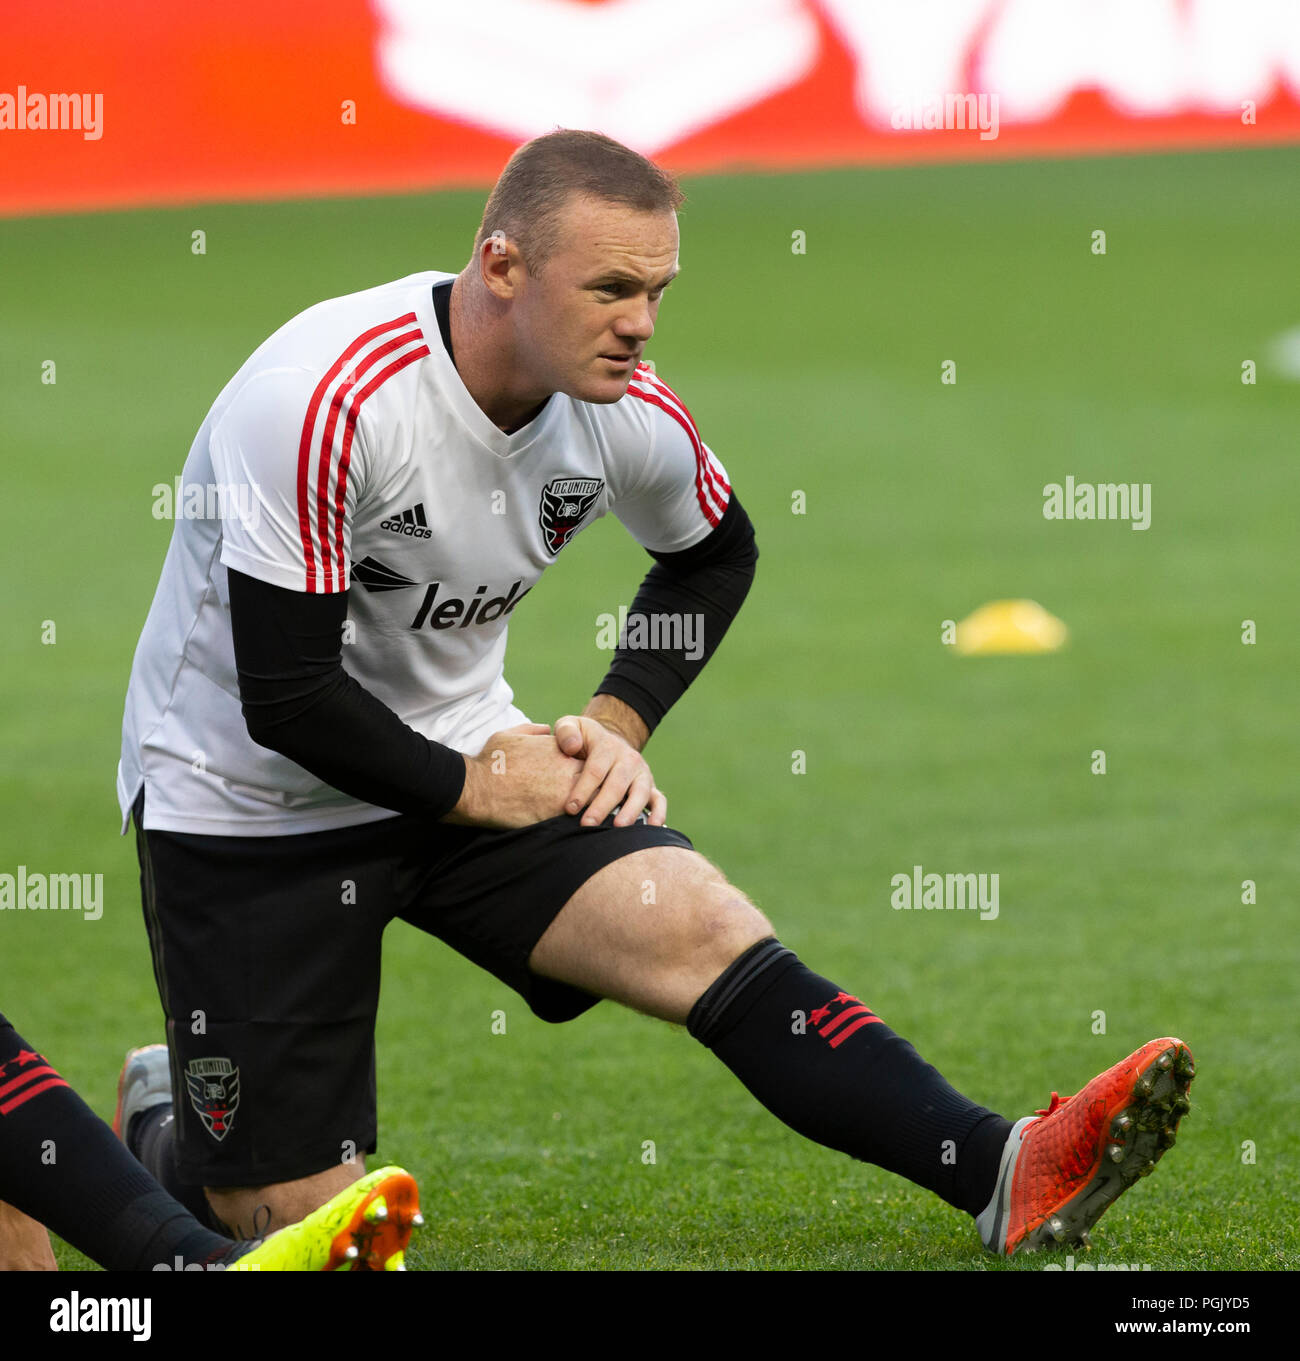 Harrison, NJ - August 26, 2018: Wayne Rooney (9) of D.C. United warming up before regular MLS game against Red Bulls at Red Bull Arena Red Bulls won 1 - 0 Credit: lev radin/Alamy Live News Stock Photo